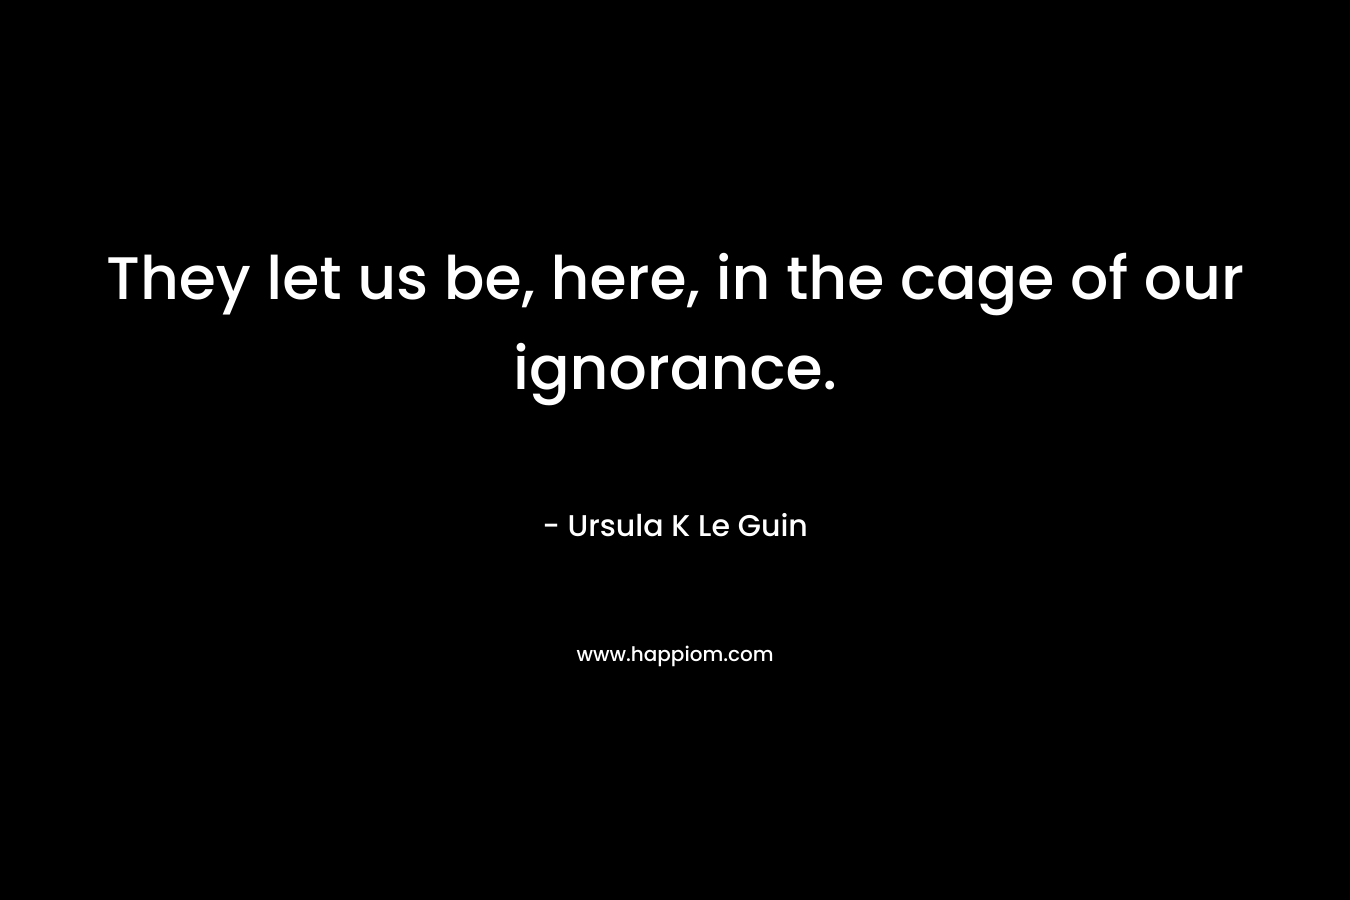 They let us be, here, in the cage of our ignorance.